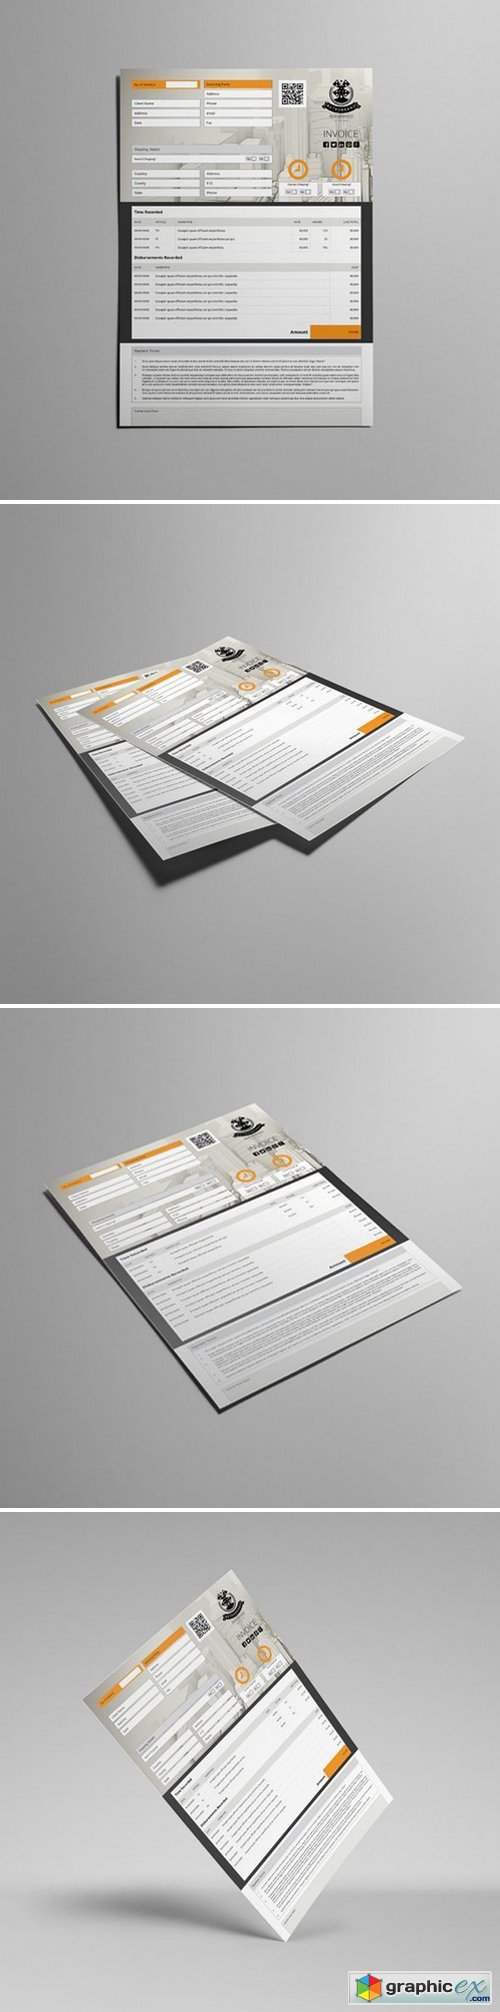 KeBoto - Business A4 Invoice Template